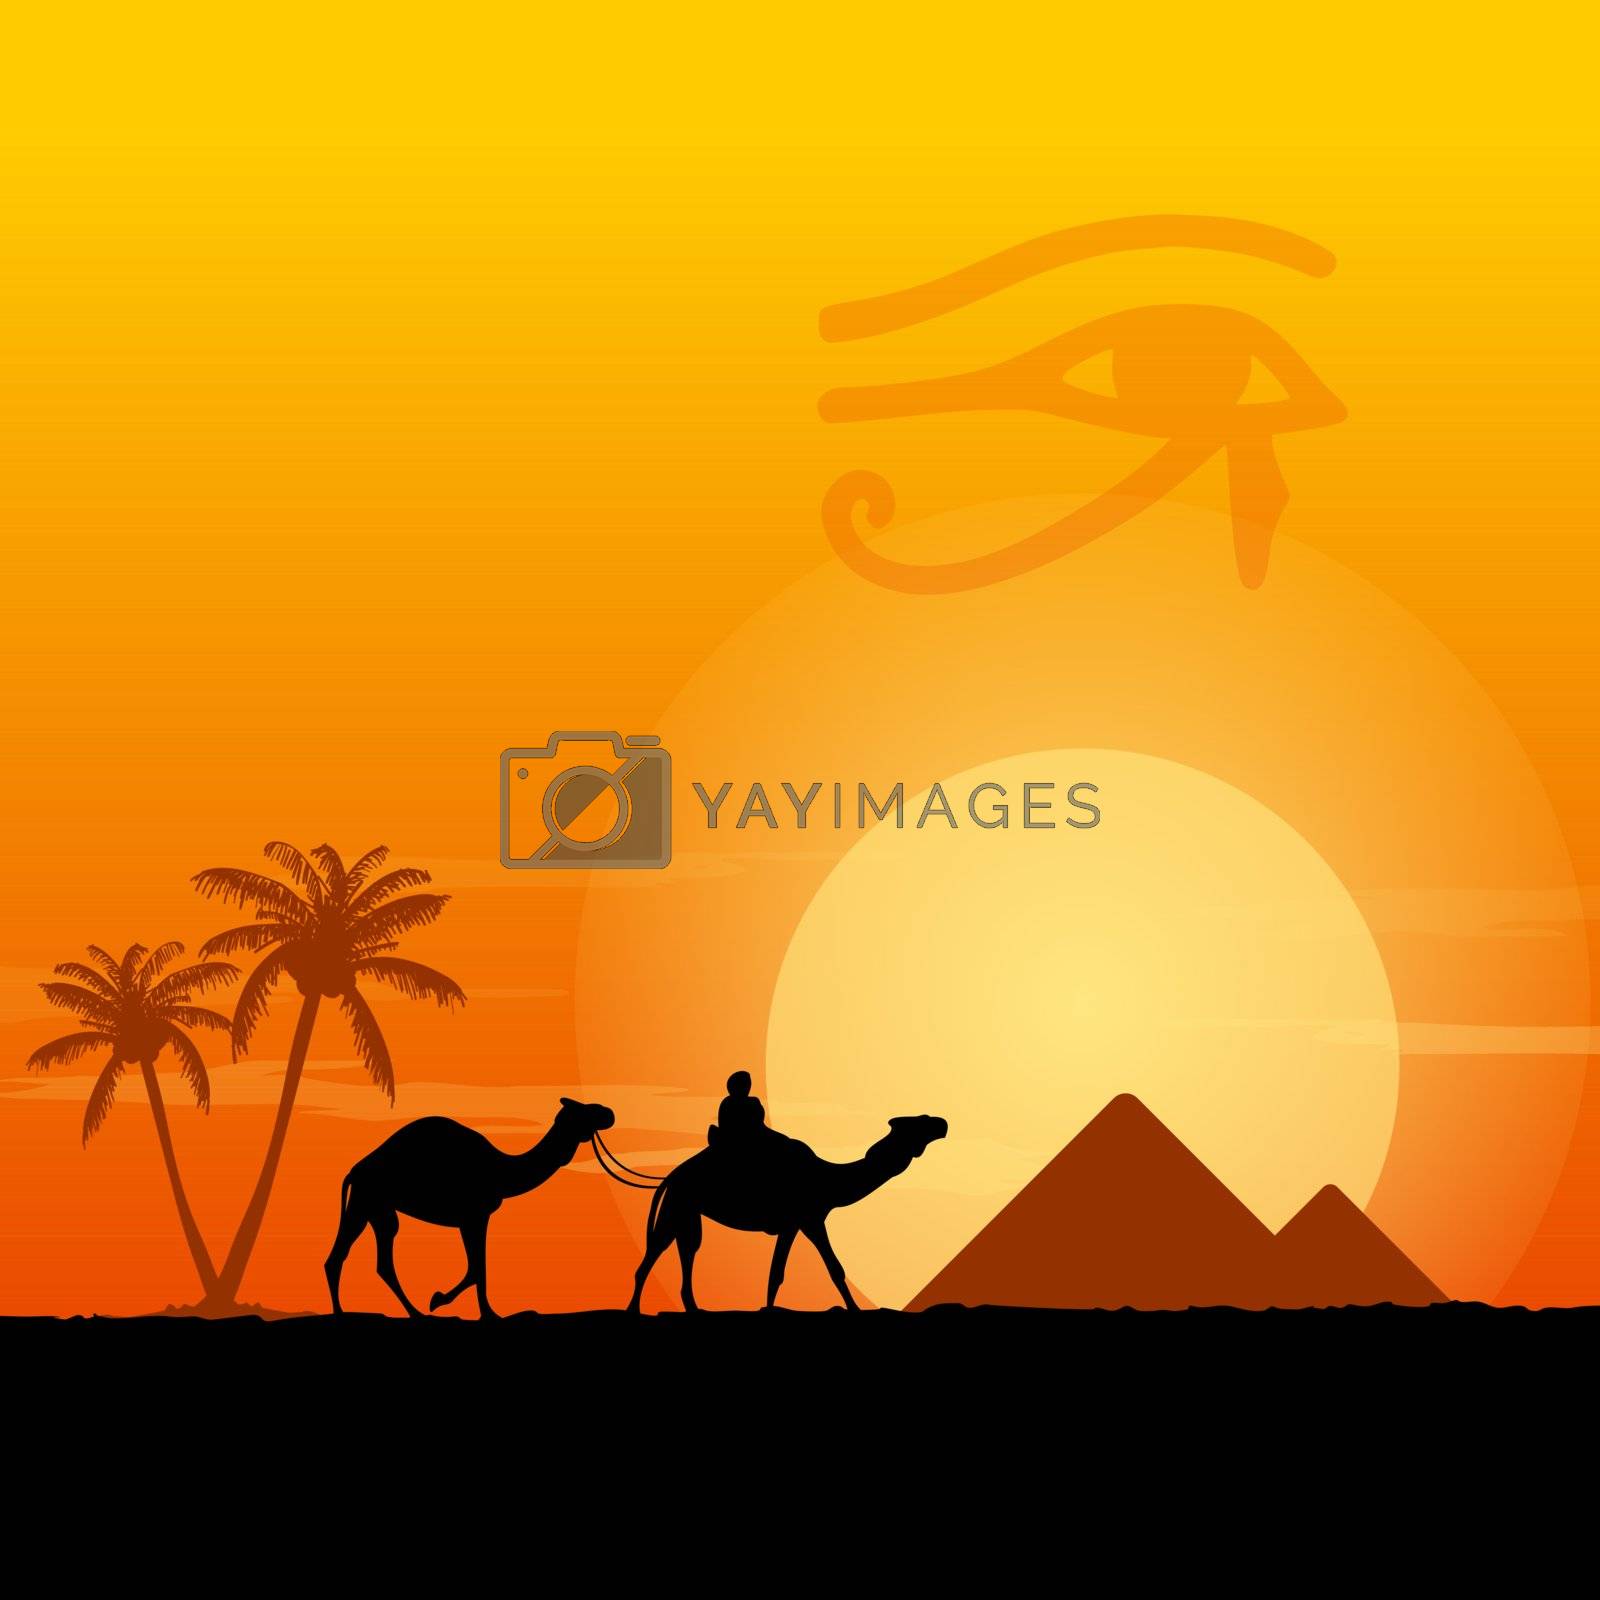 Royalty free image of Egypt symbols and Pyramids by zager